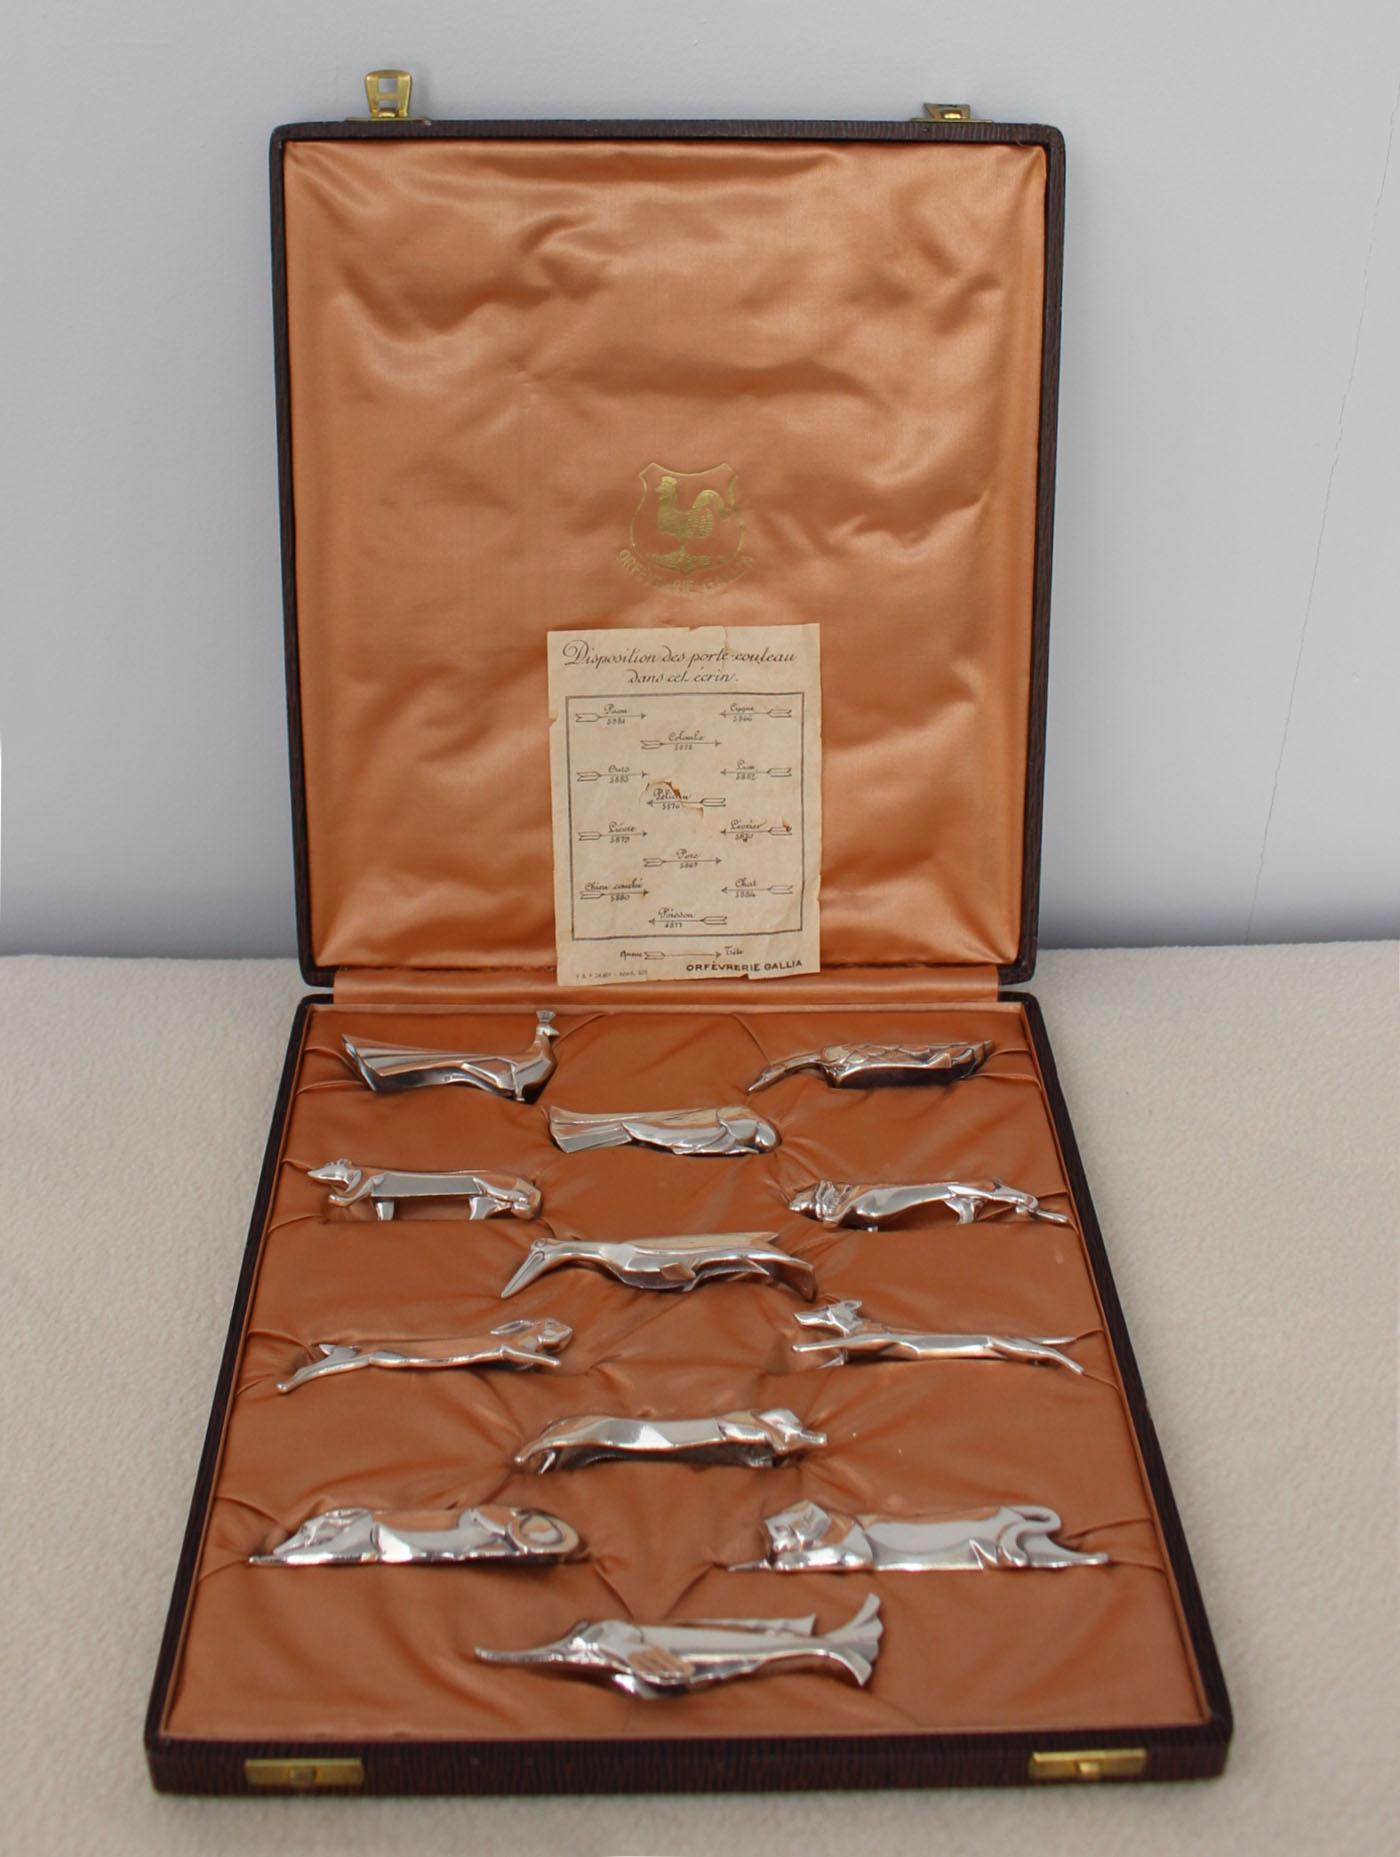 Set of 12 fine French Art Deco silver plated knife rests designed by Marcel Sandoz for the Gallia collection of Christofle. All 12 animals are different.
Original case.

Two sets are available (price is for one set of twelve)

Average size of knife